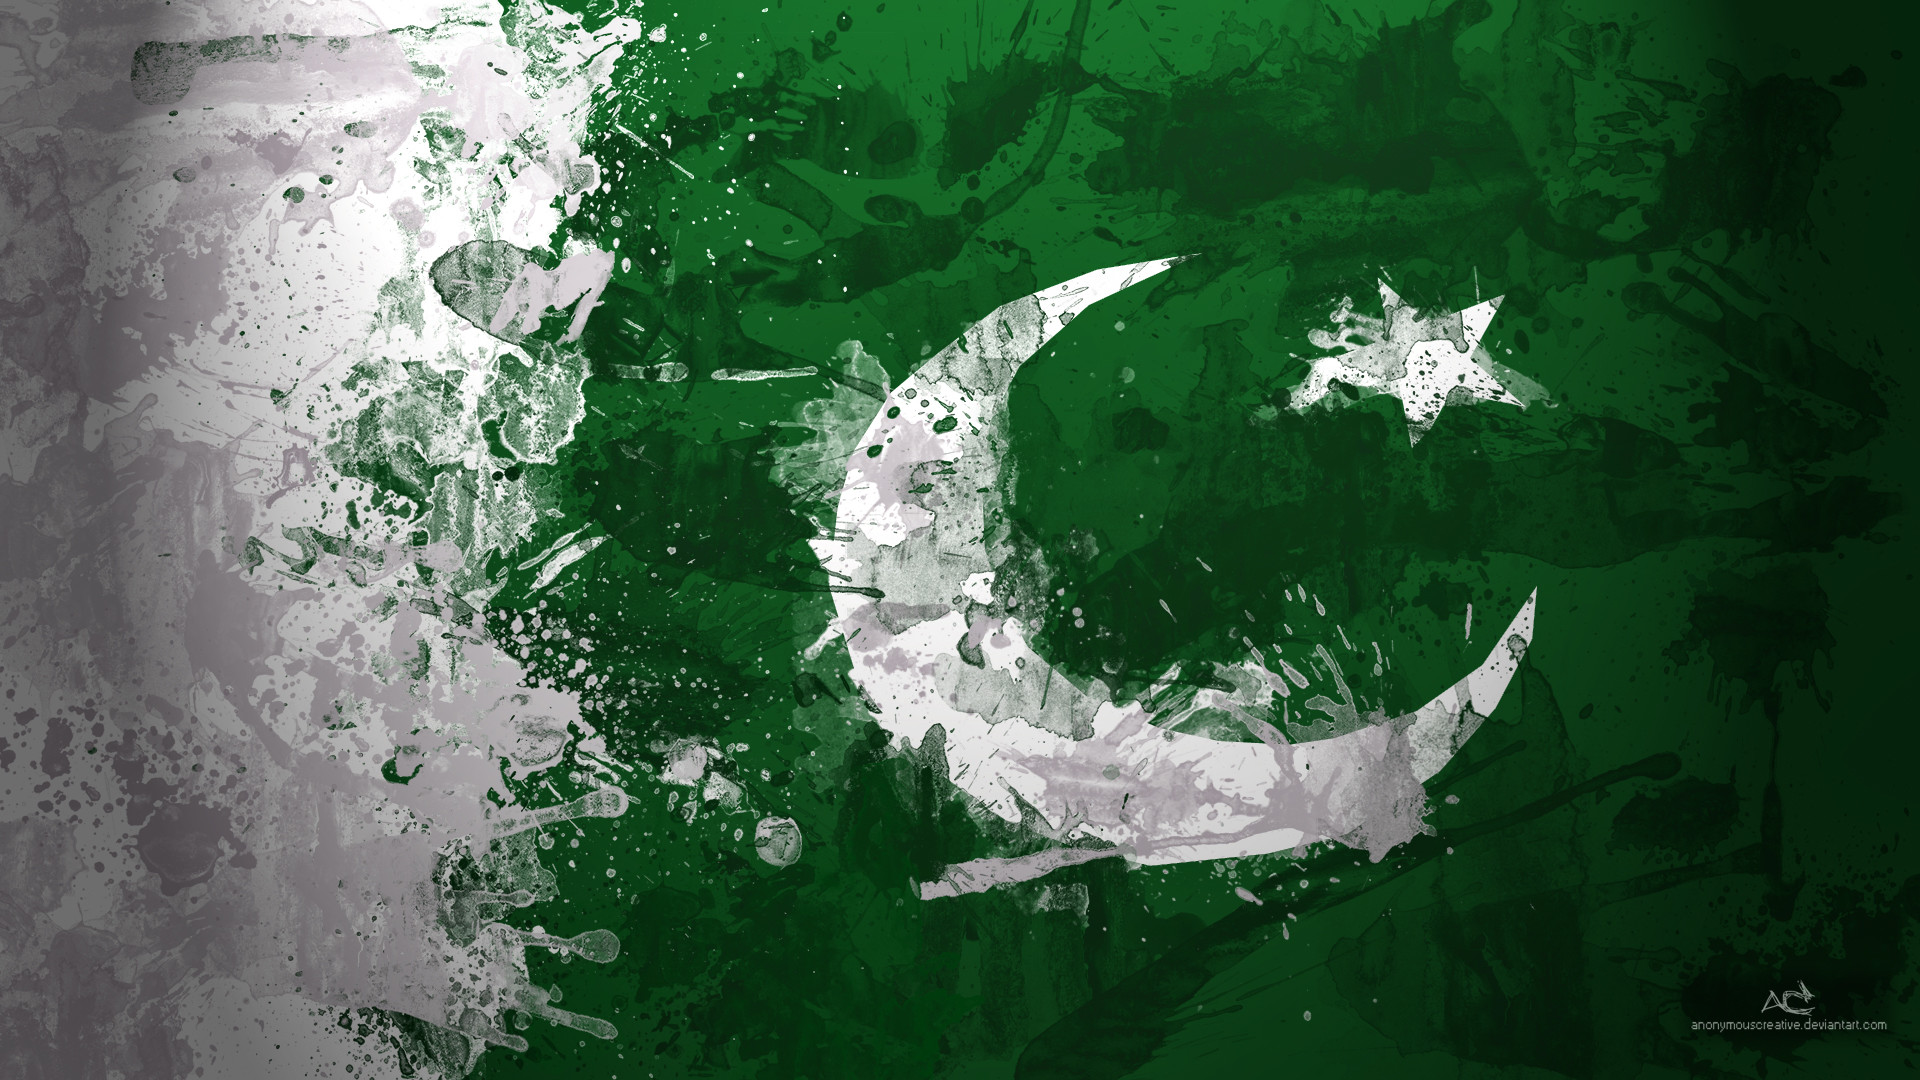 1920x1080 pakistan wallpaper Download Pakistan Wallpapers, With Complete Pakistani  Culture and Historical Background